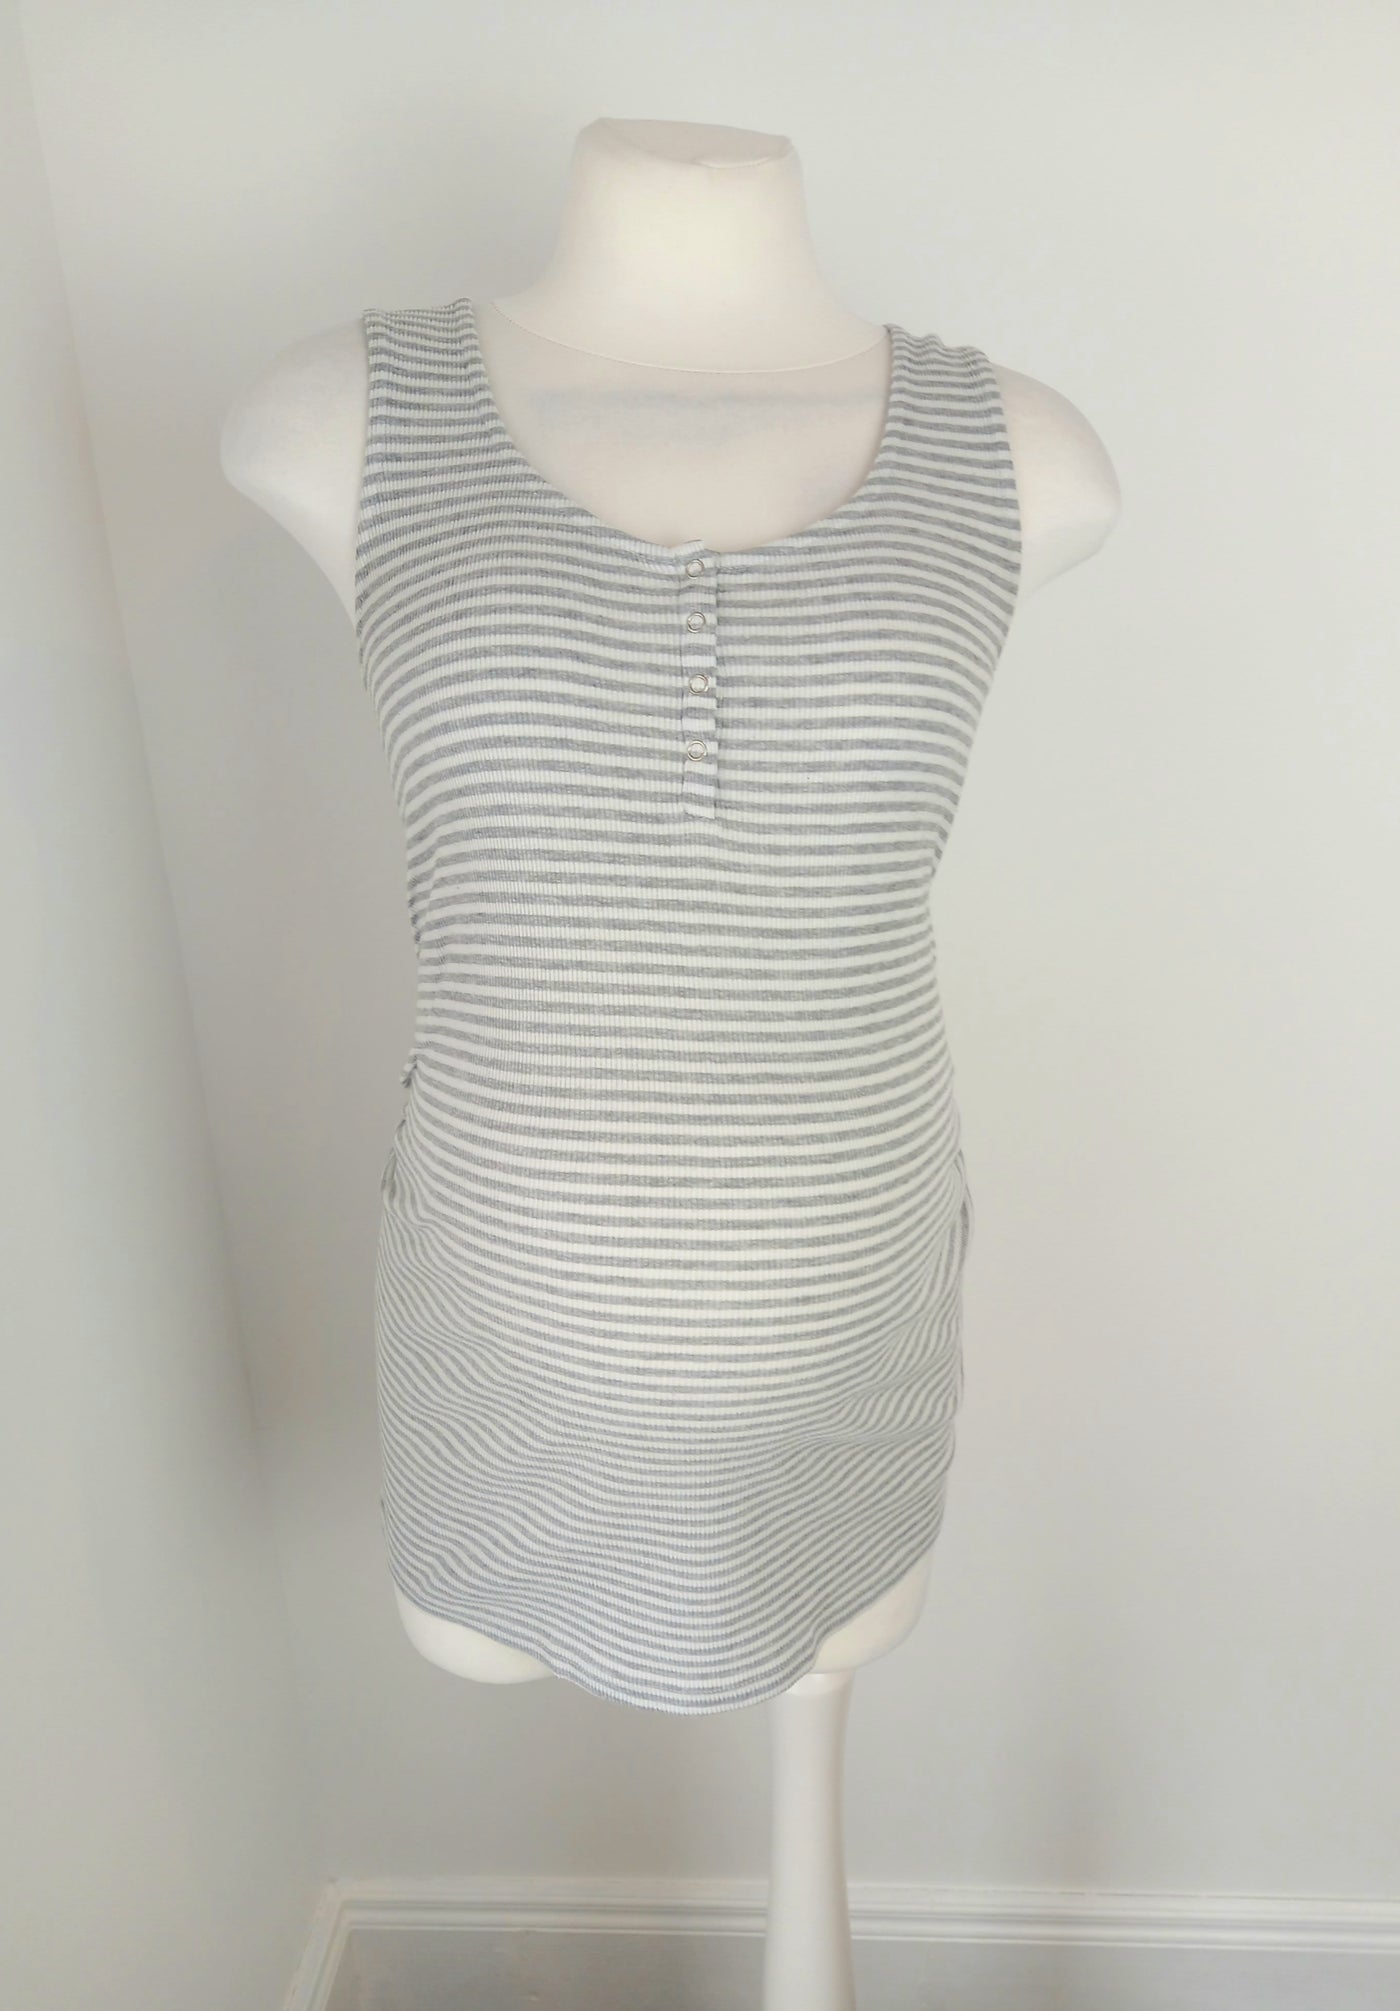 New Look Maternity grey & white striped sleeveless top - Size 12